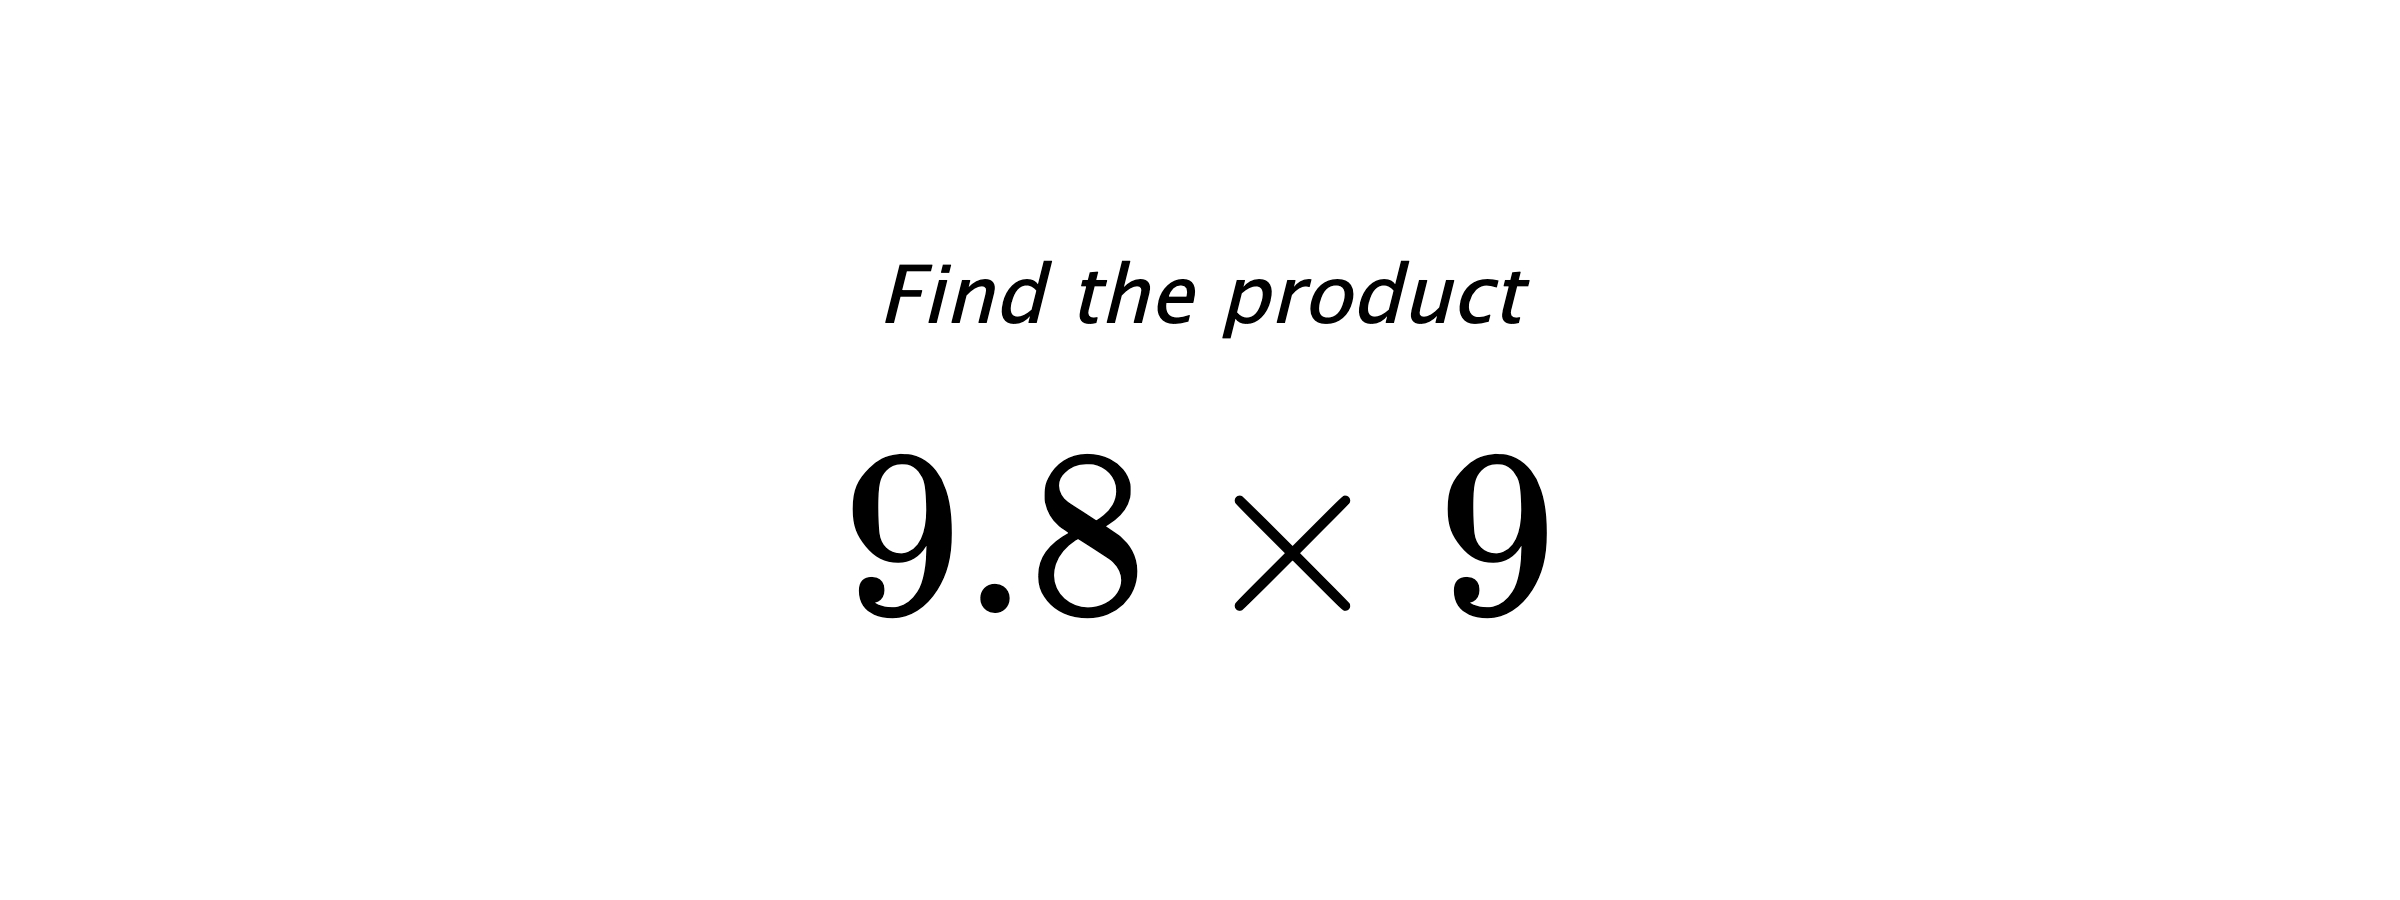 Find the product $ 9.8 \times 9 $